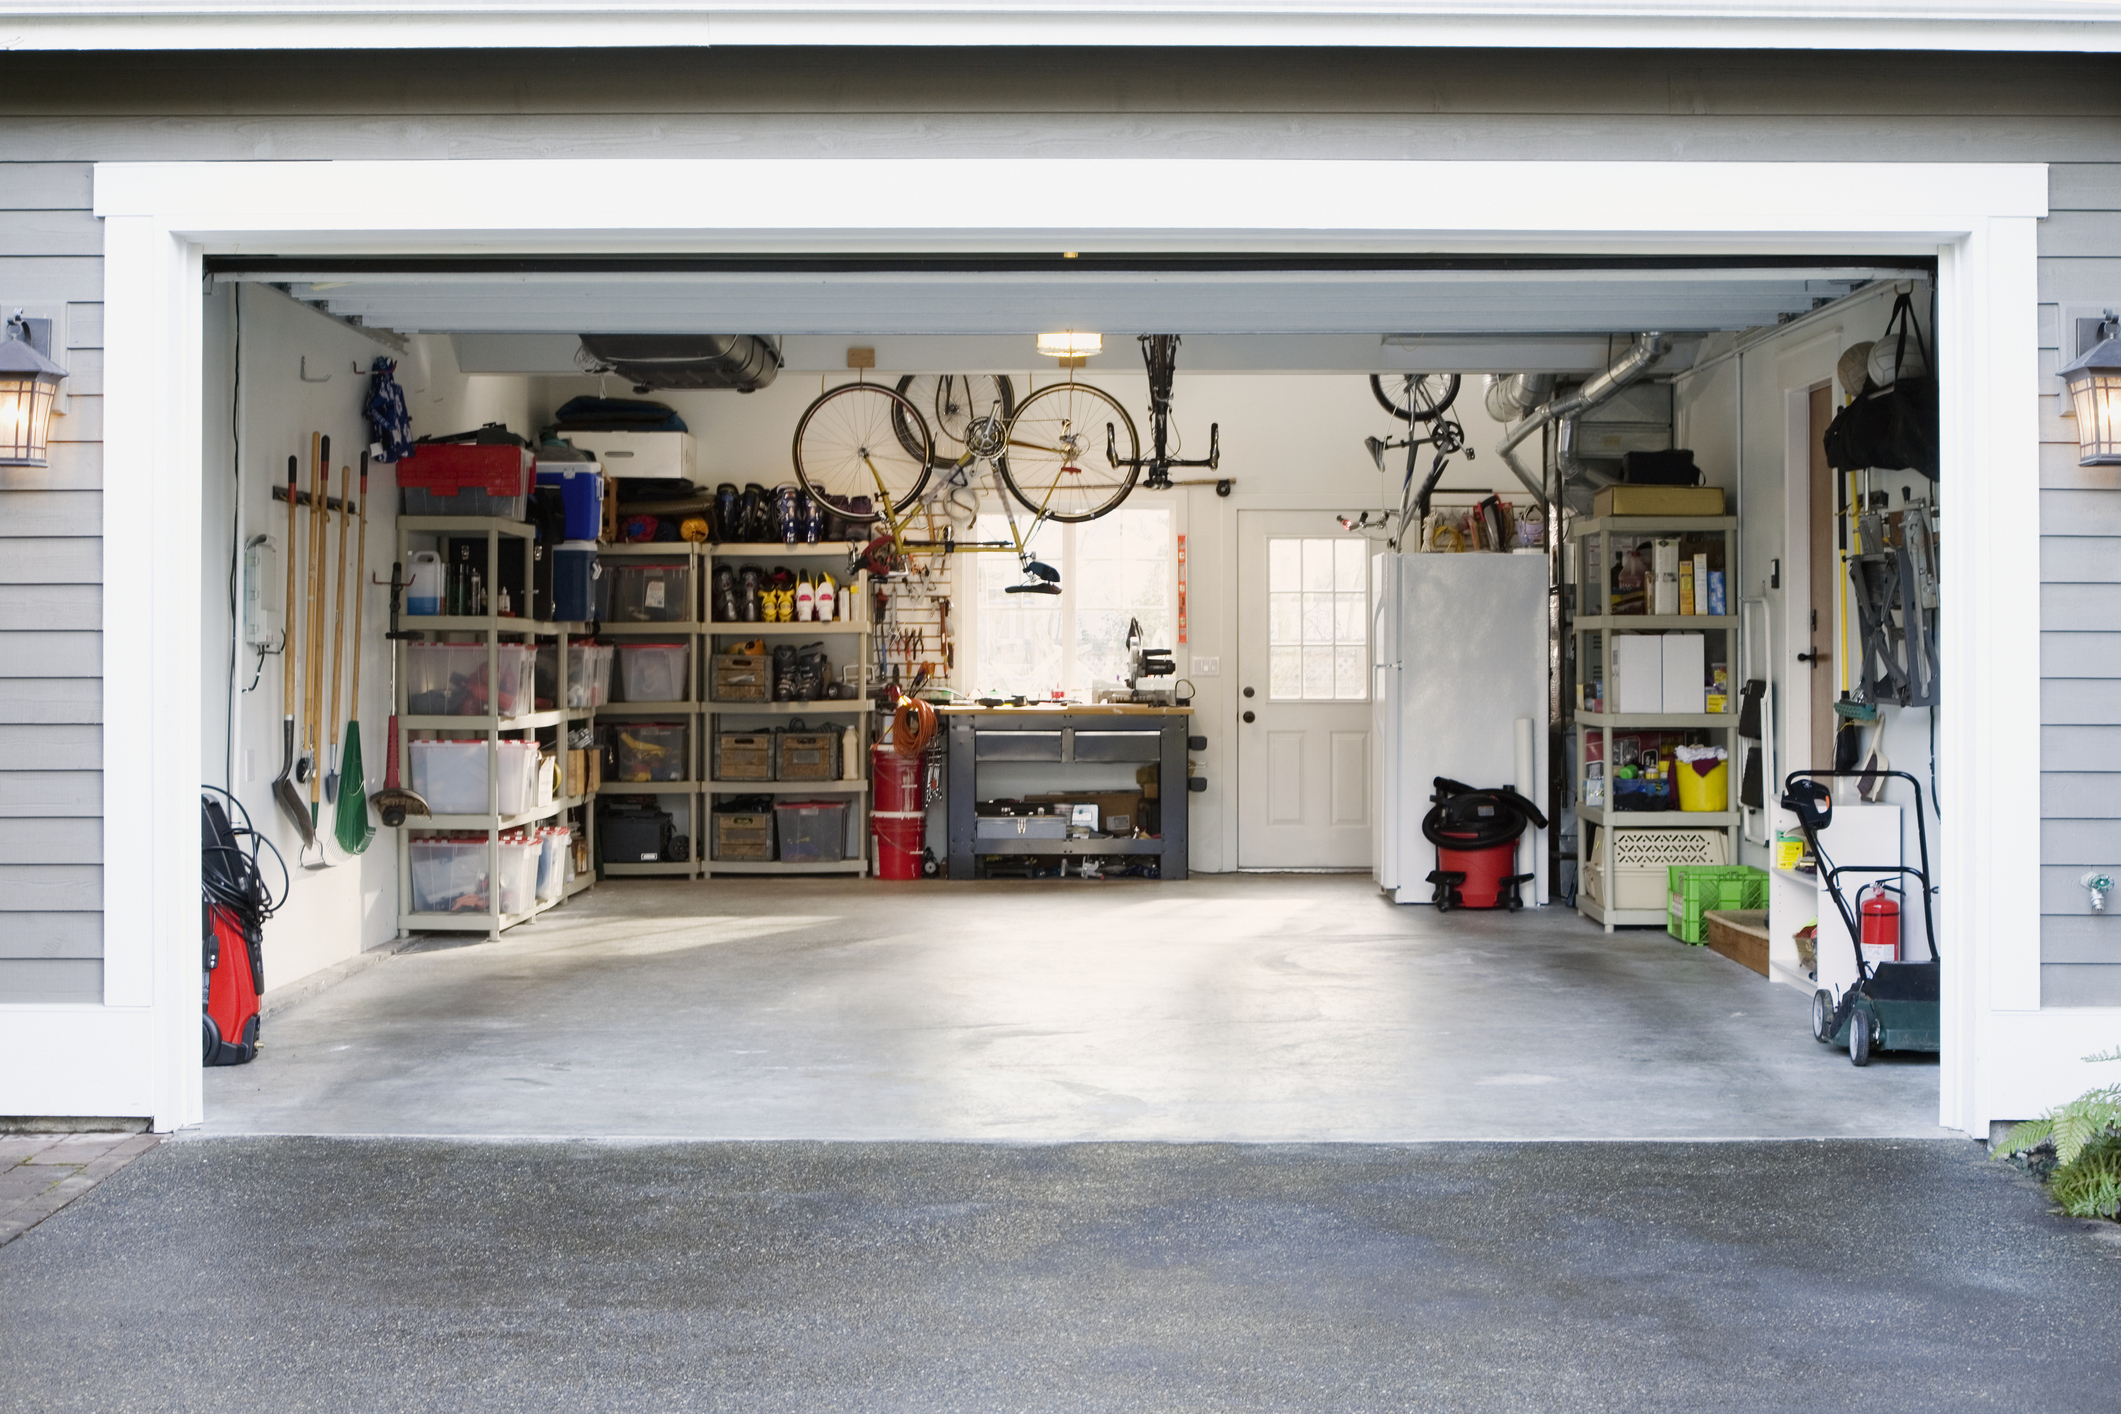 13 Garage Storage Ideas That Leave Room for You to Park Your Car